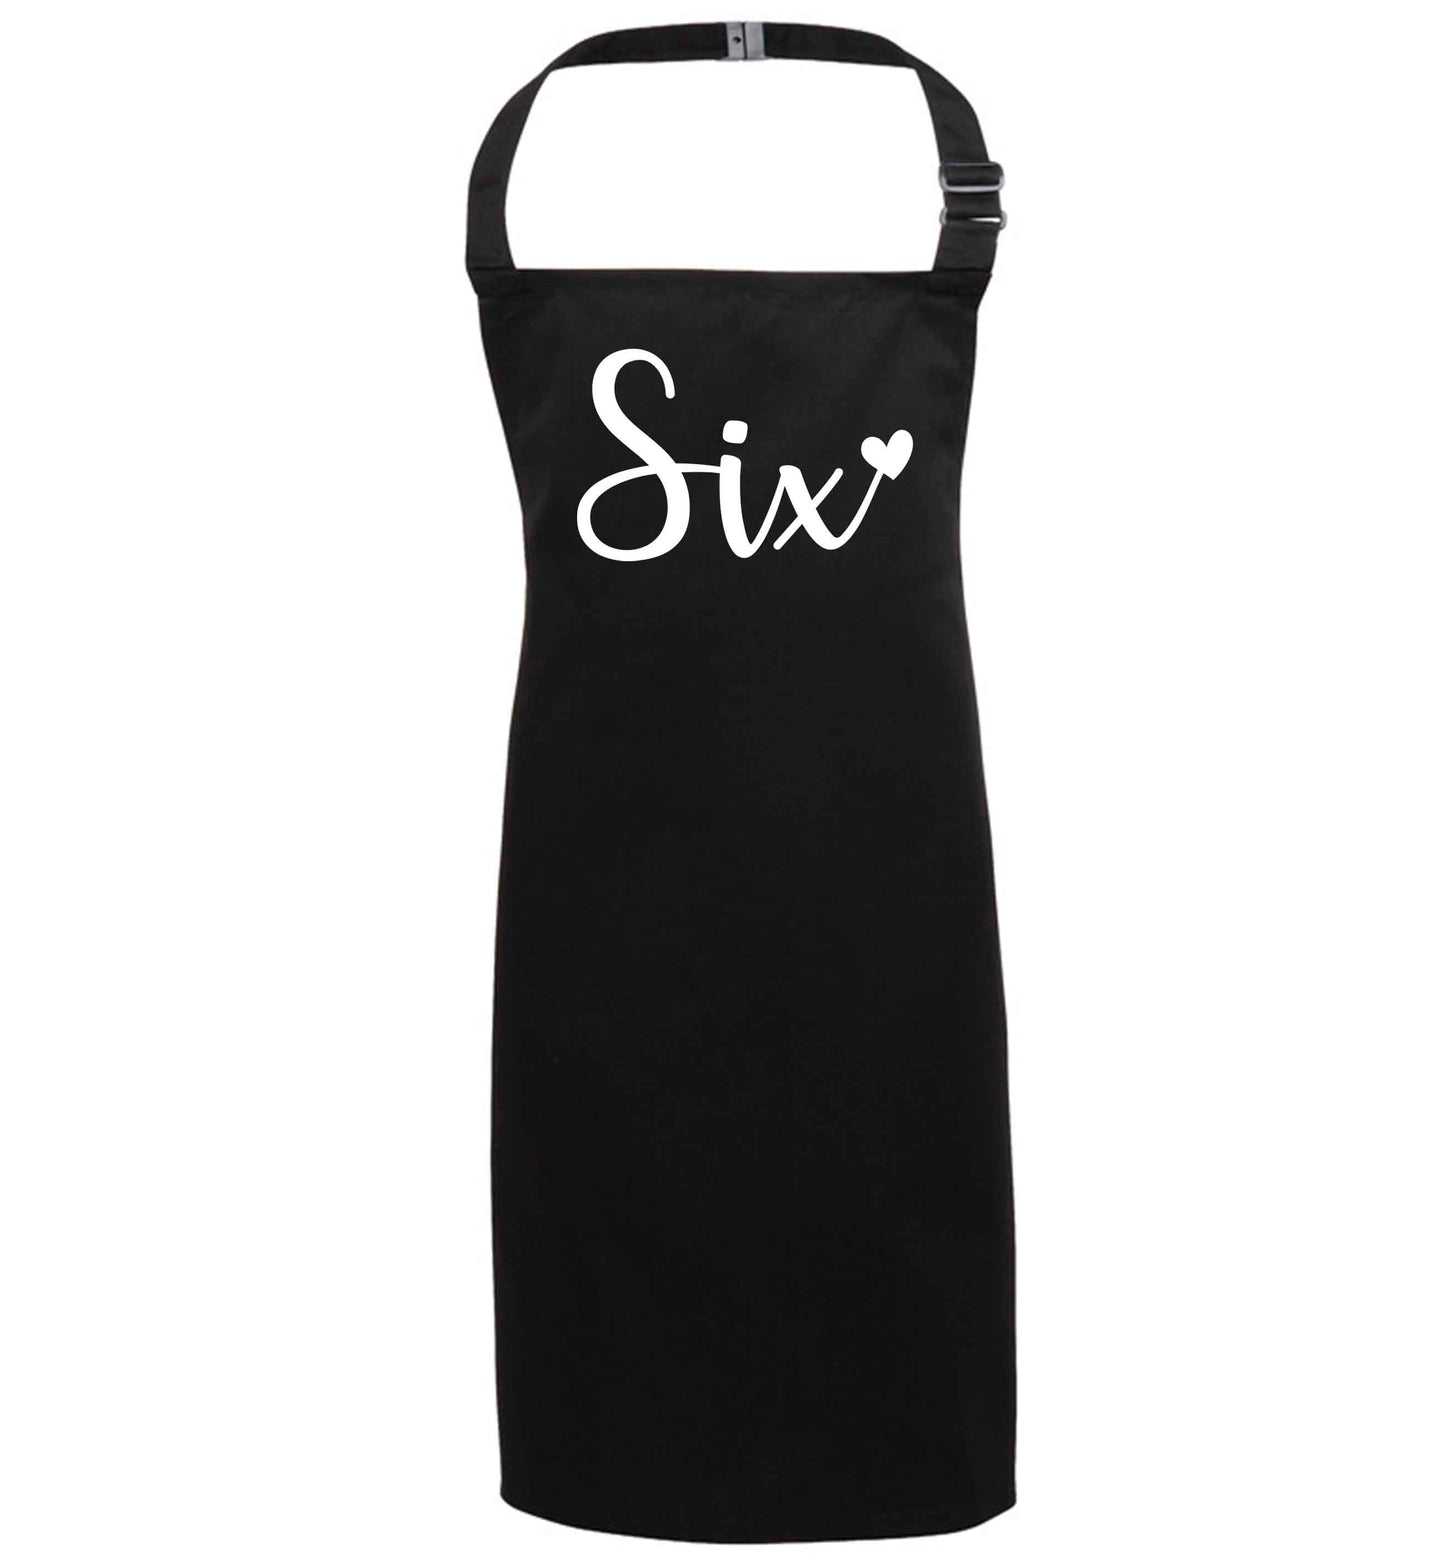 Six and heart! black apron 7-10 years